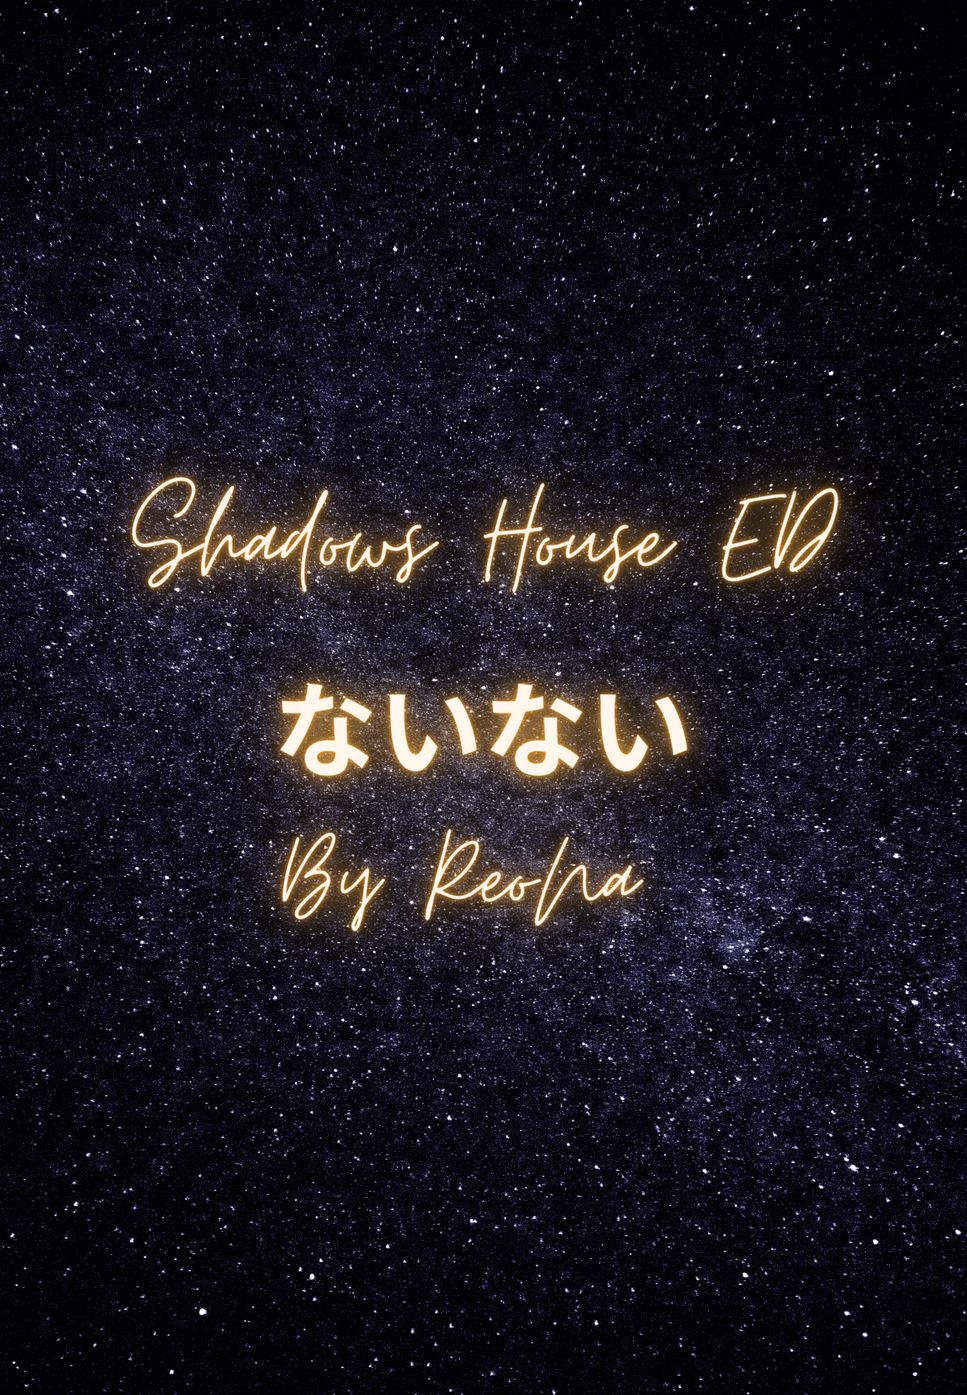 Shadows House ED - ReoNa - ないない by Esther